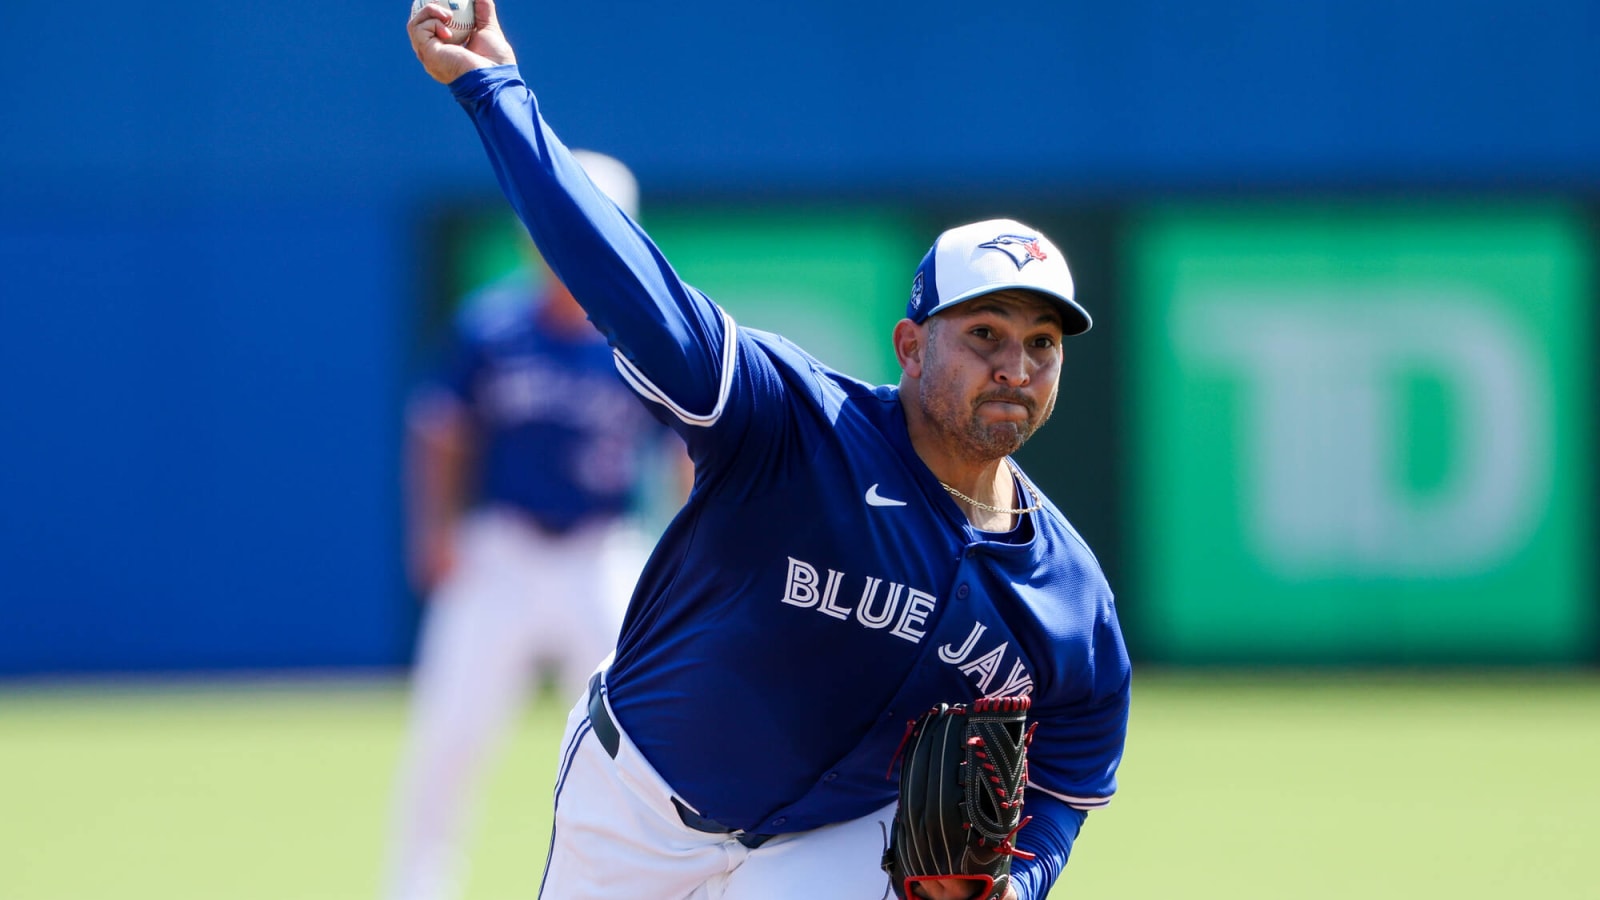 Paolo Espino struck out three, Rafael Lantigua drove in the game winning run, and more as the Blue Jays defeated the Tampa Bay Rays